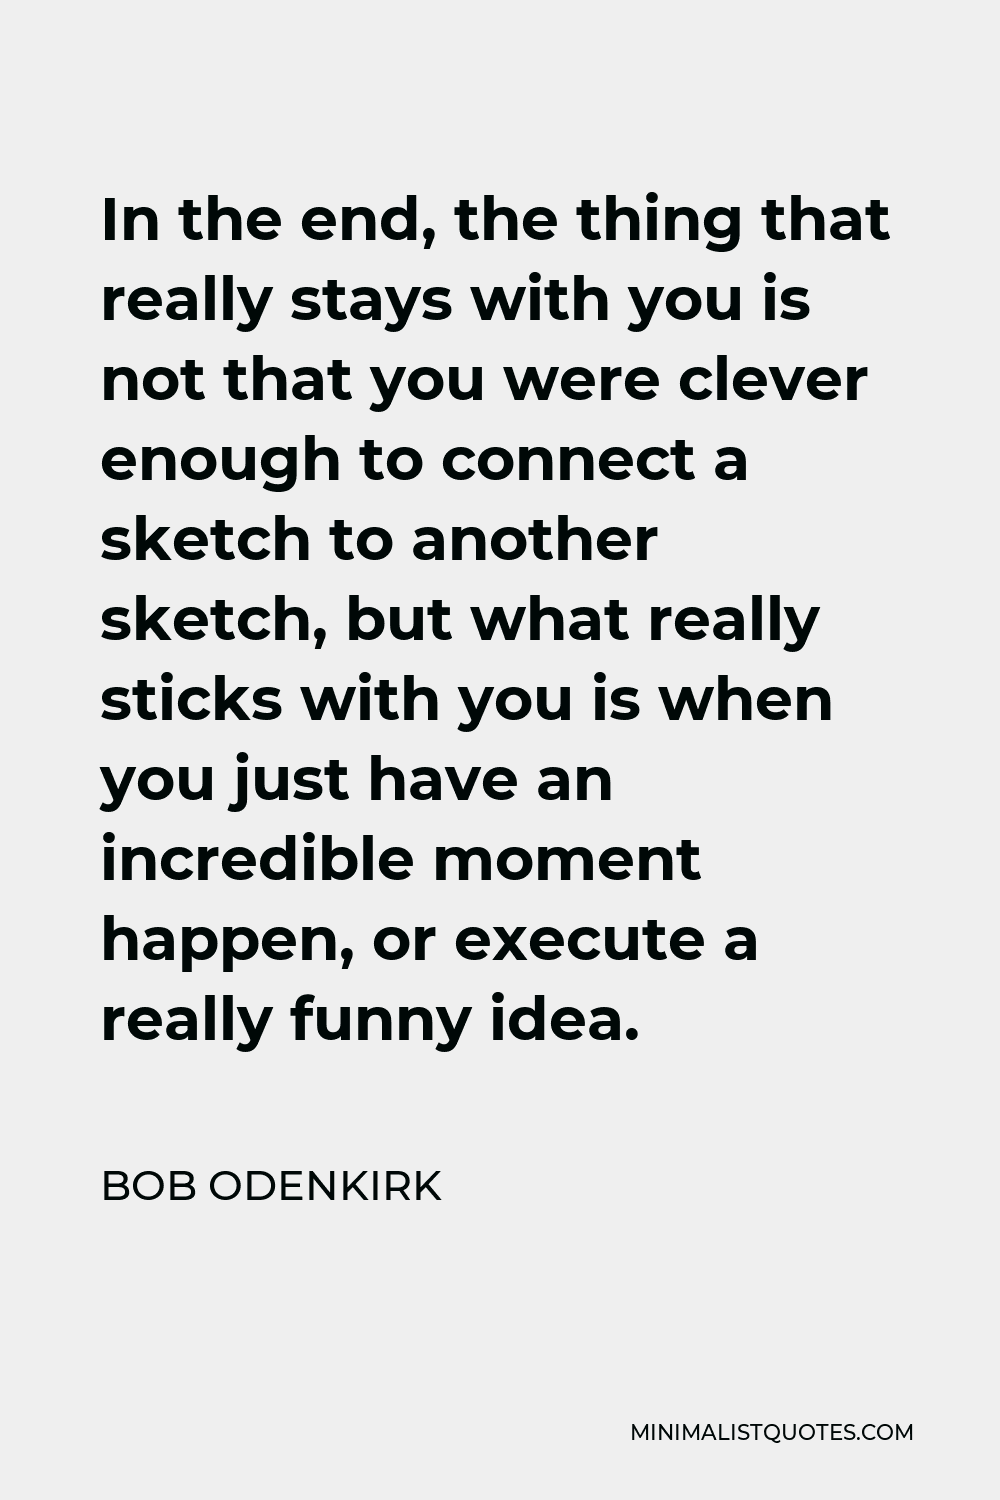 Bob Odenkirk Quote - In the end, the thing that really stays with you is not that you were clever enough to connect a sketch to another sketch, but what really sticks with you is when you just have an incredible moment happen, or execute a really funny idea.